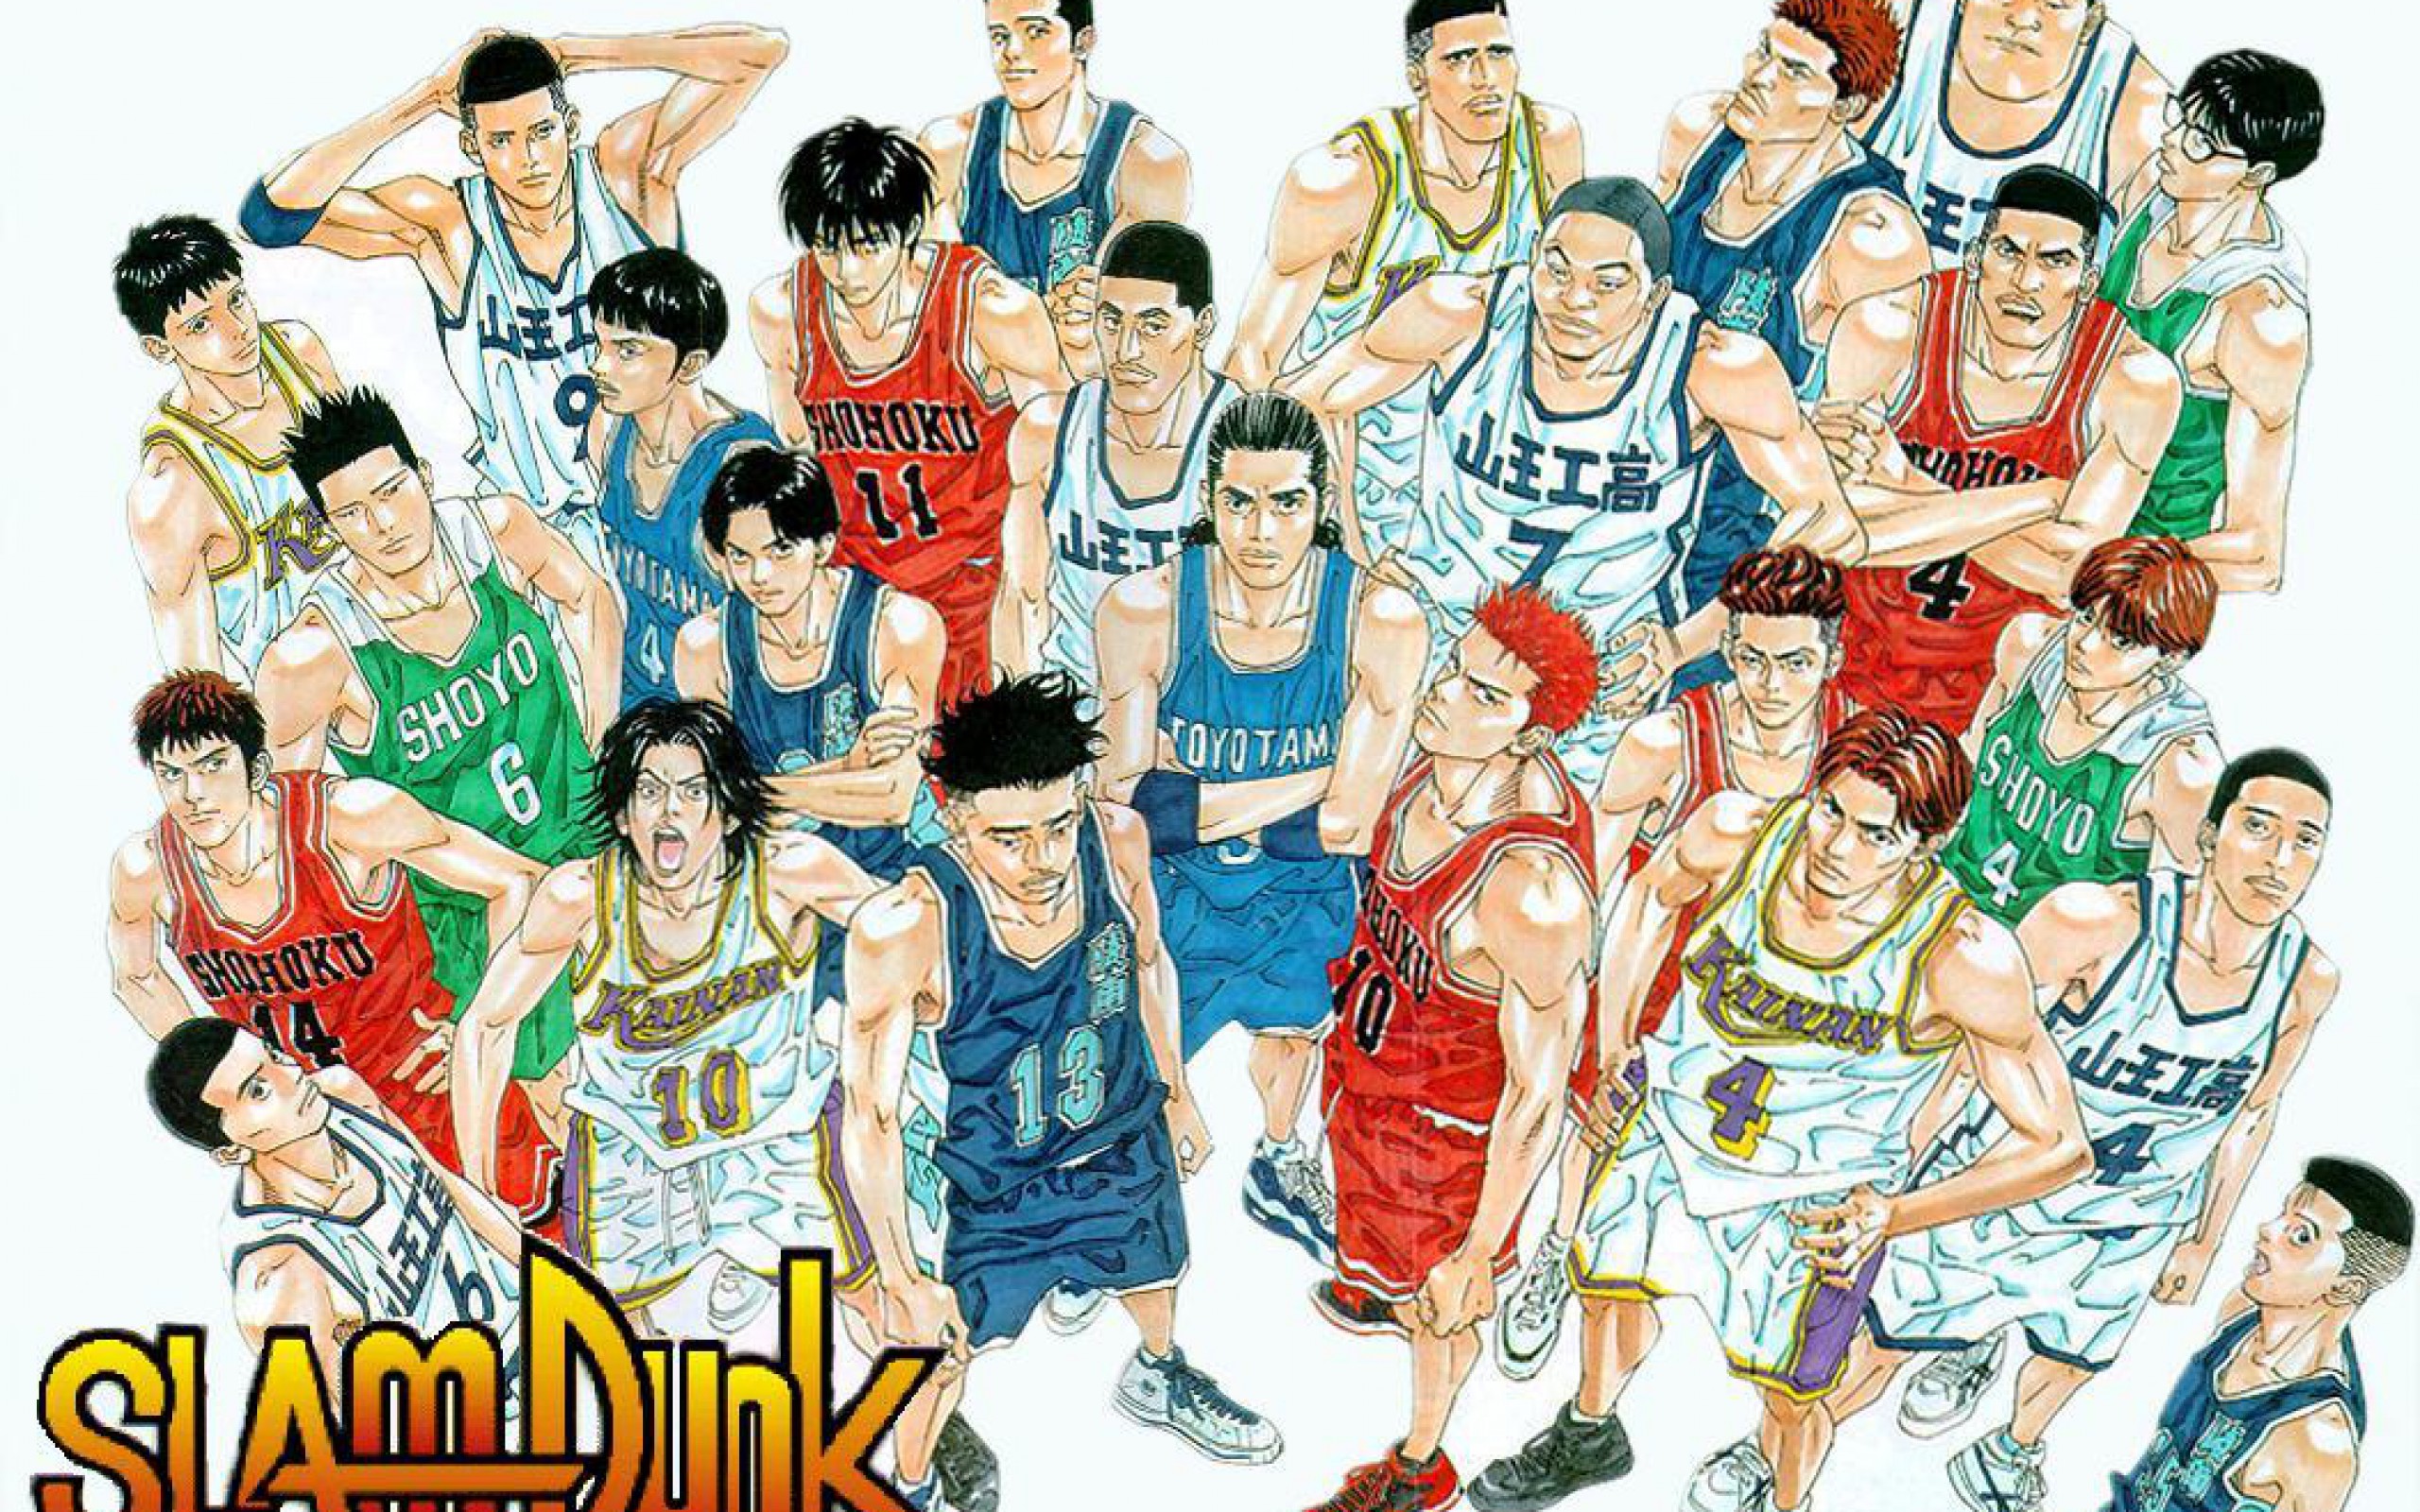 Slam Dunk Wallpapers Anime Hq Slam Dunk Pictures 4k Wallpapers 2019